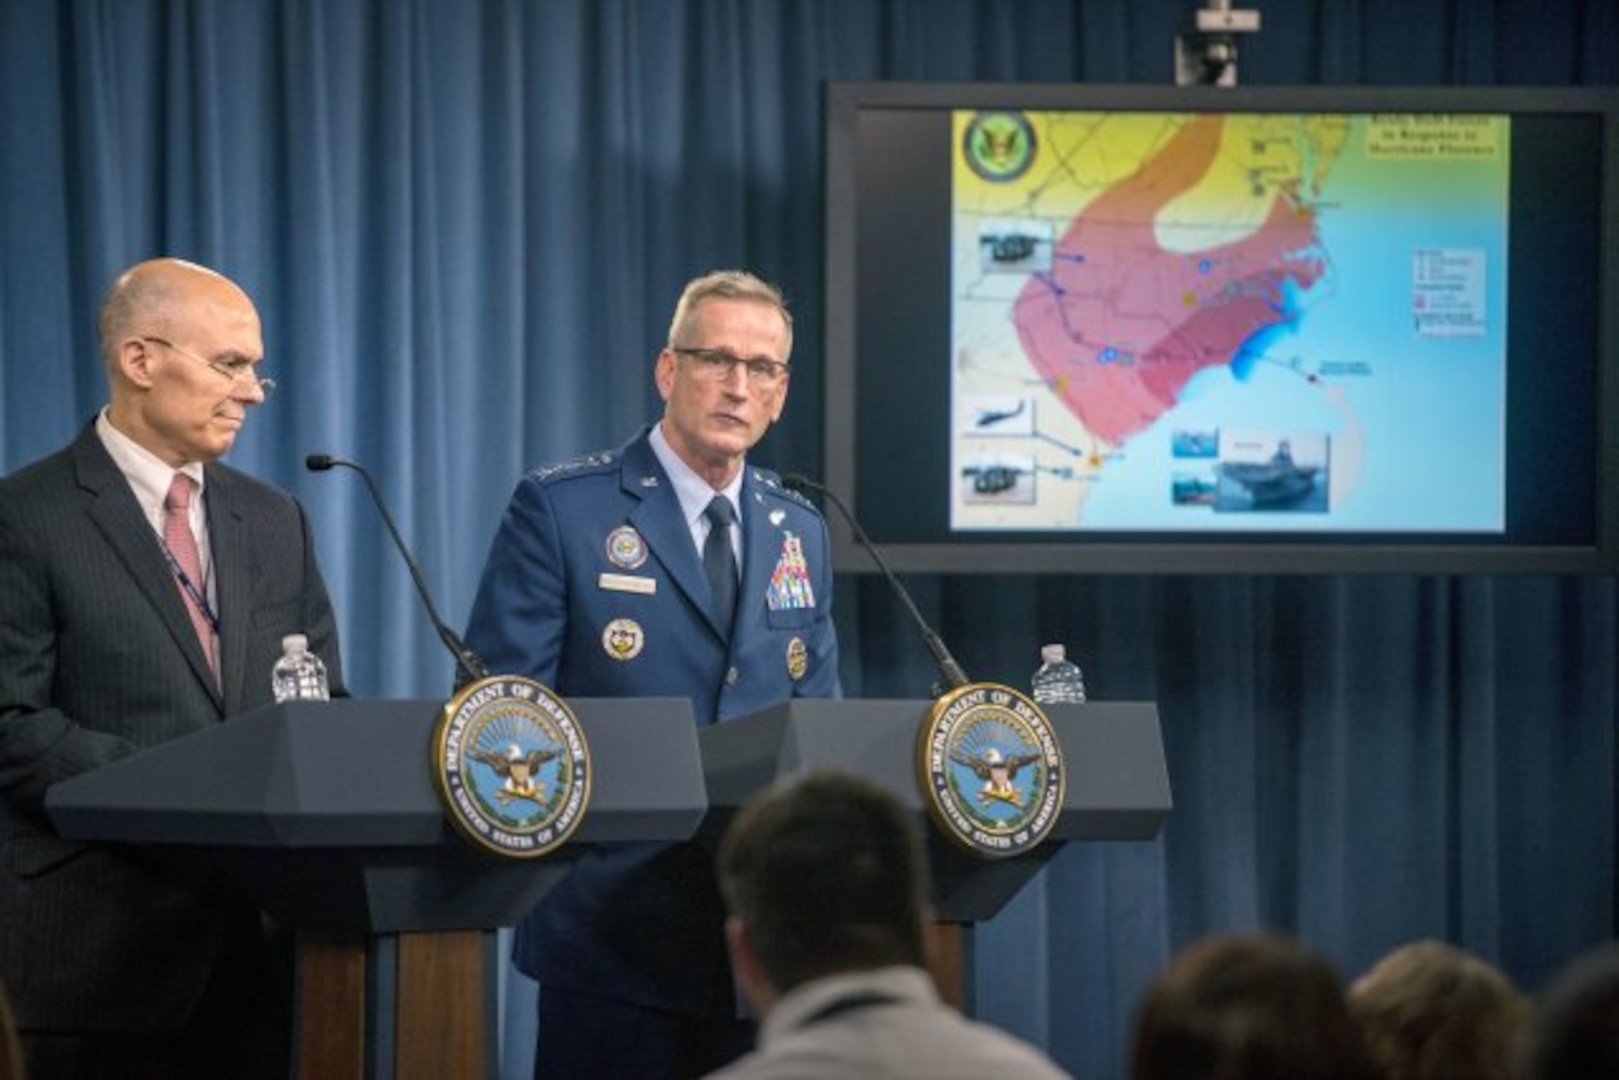 Kenneth P. Rapuano, left, assistant secretary of defense for homeland defense and global security, and Air Force Gen. Terrence J. O'Shaughnessy, commander of the North American Aerospace Defense Command and U.S. Northern Command, brief reporters at the Pentagon, Sept. 13, 2018, on Defense Department preparations for Hurricane Florence.